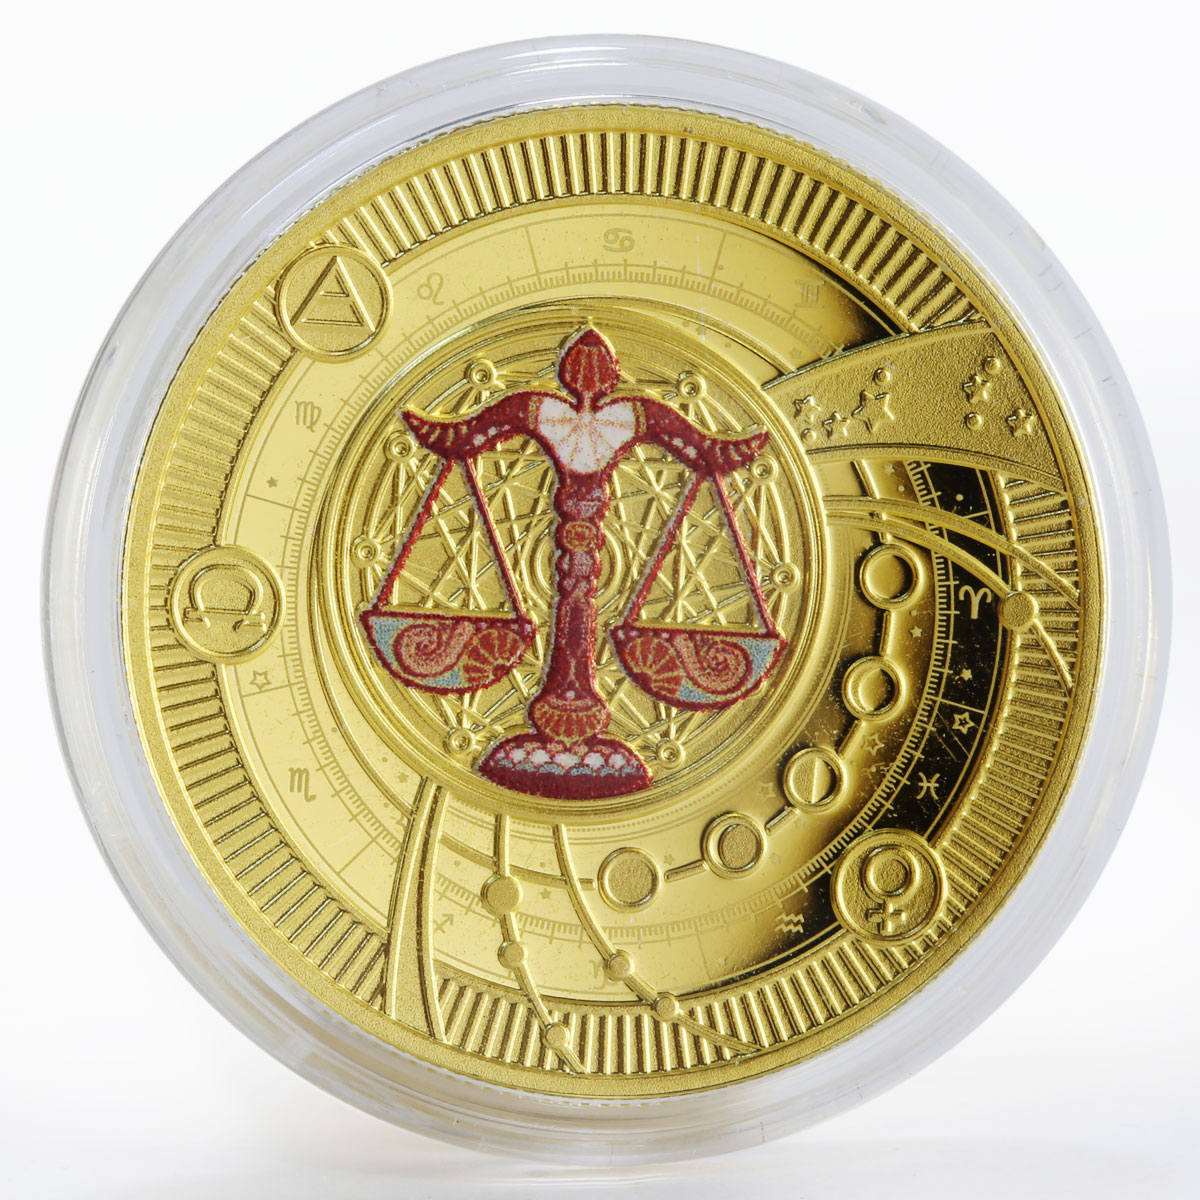 Cameroon 500 francs Zodiac Signs Libra colored gilded proof silver coin 2018